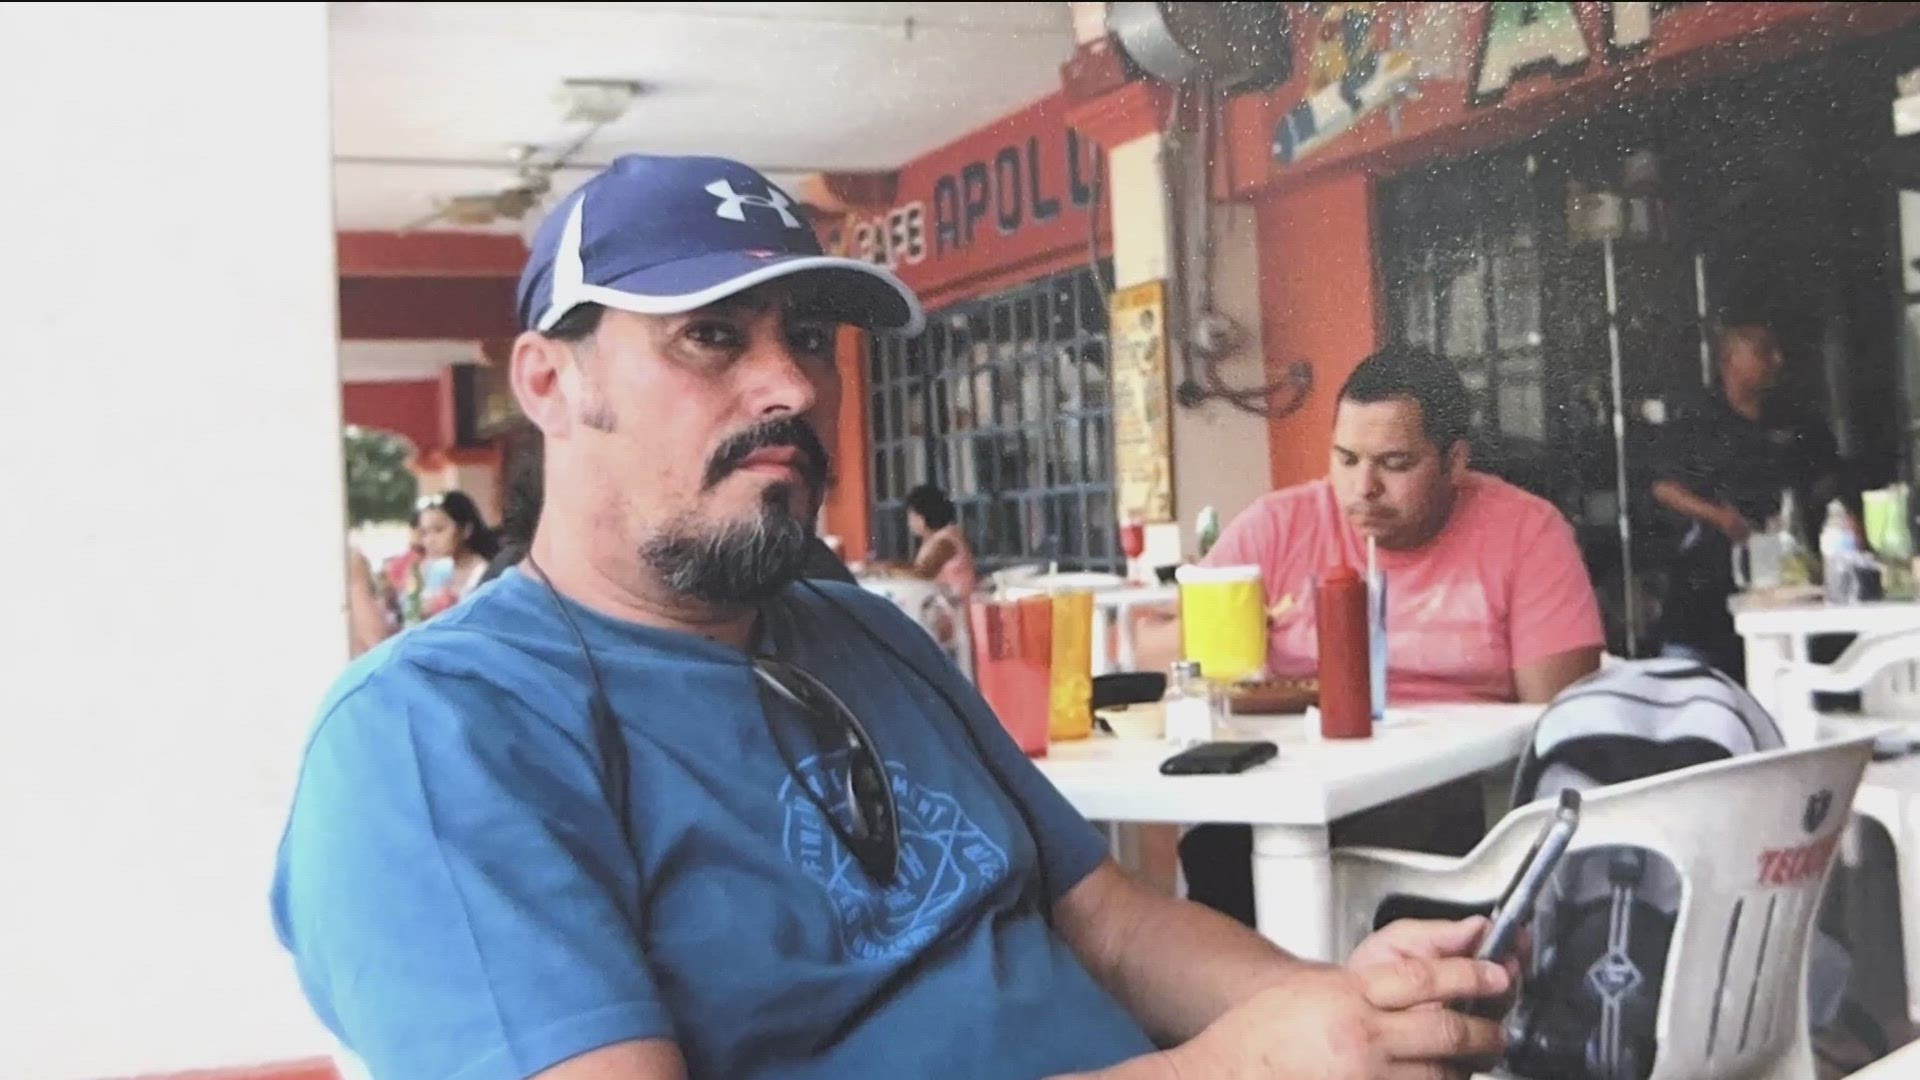 Abel Bermudez, a beloved father of six, tragically lost his life in a wrong-way crash caused by an intoxicated driver.